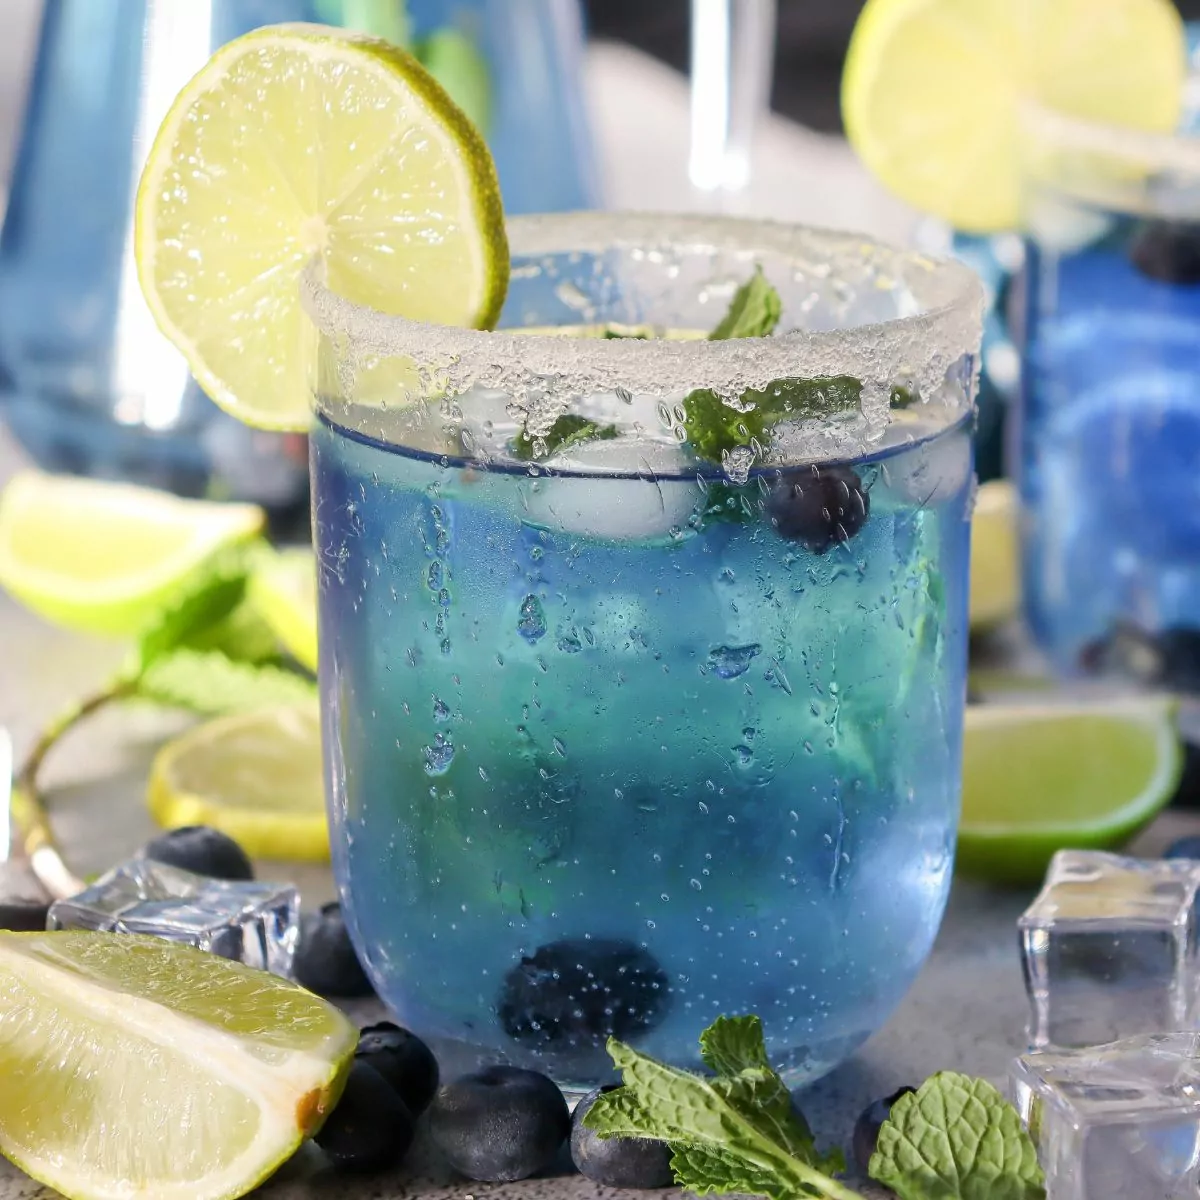 blueberry water with limes in glass.